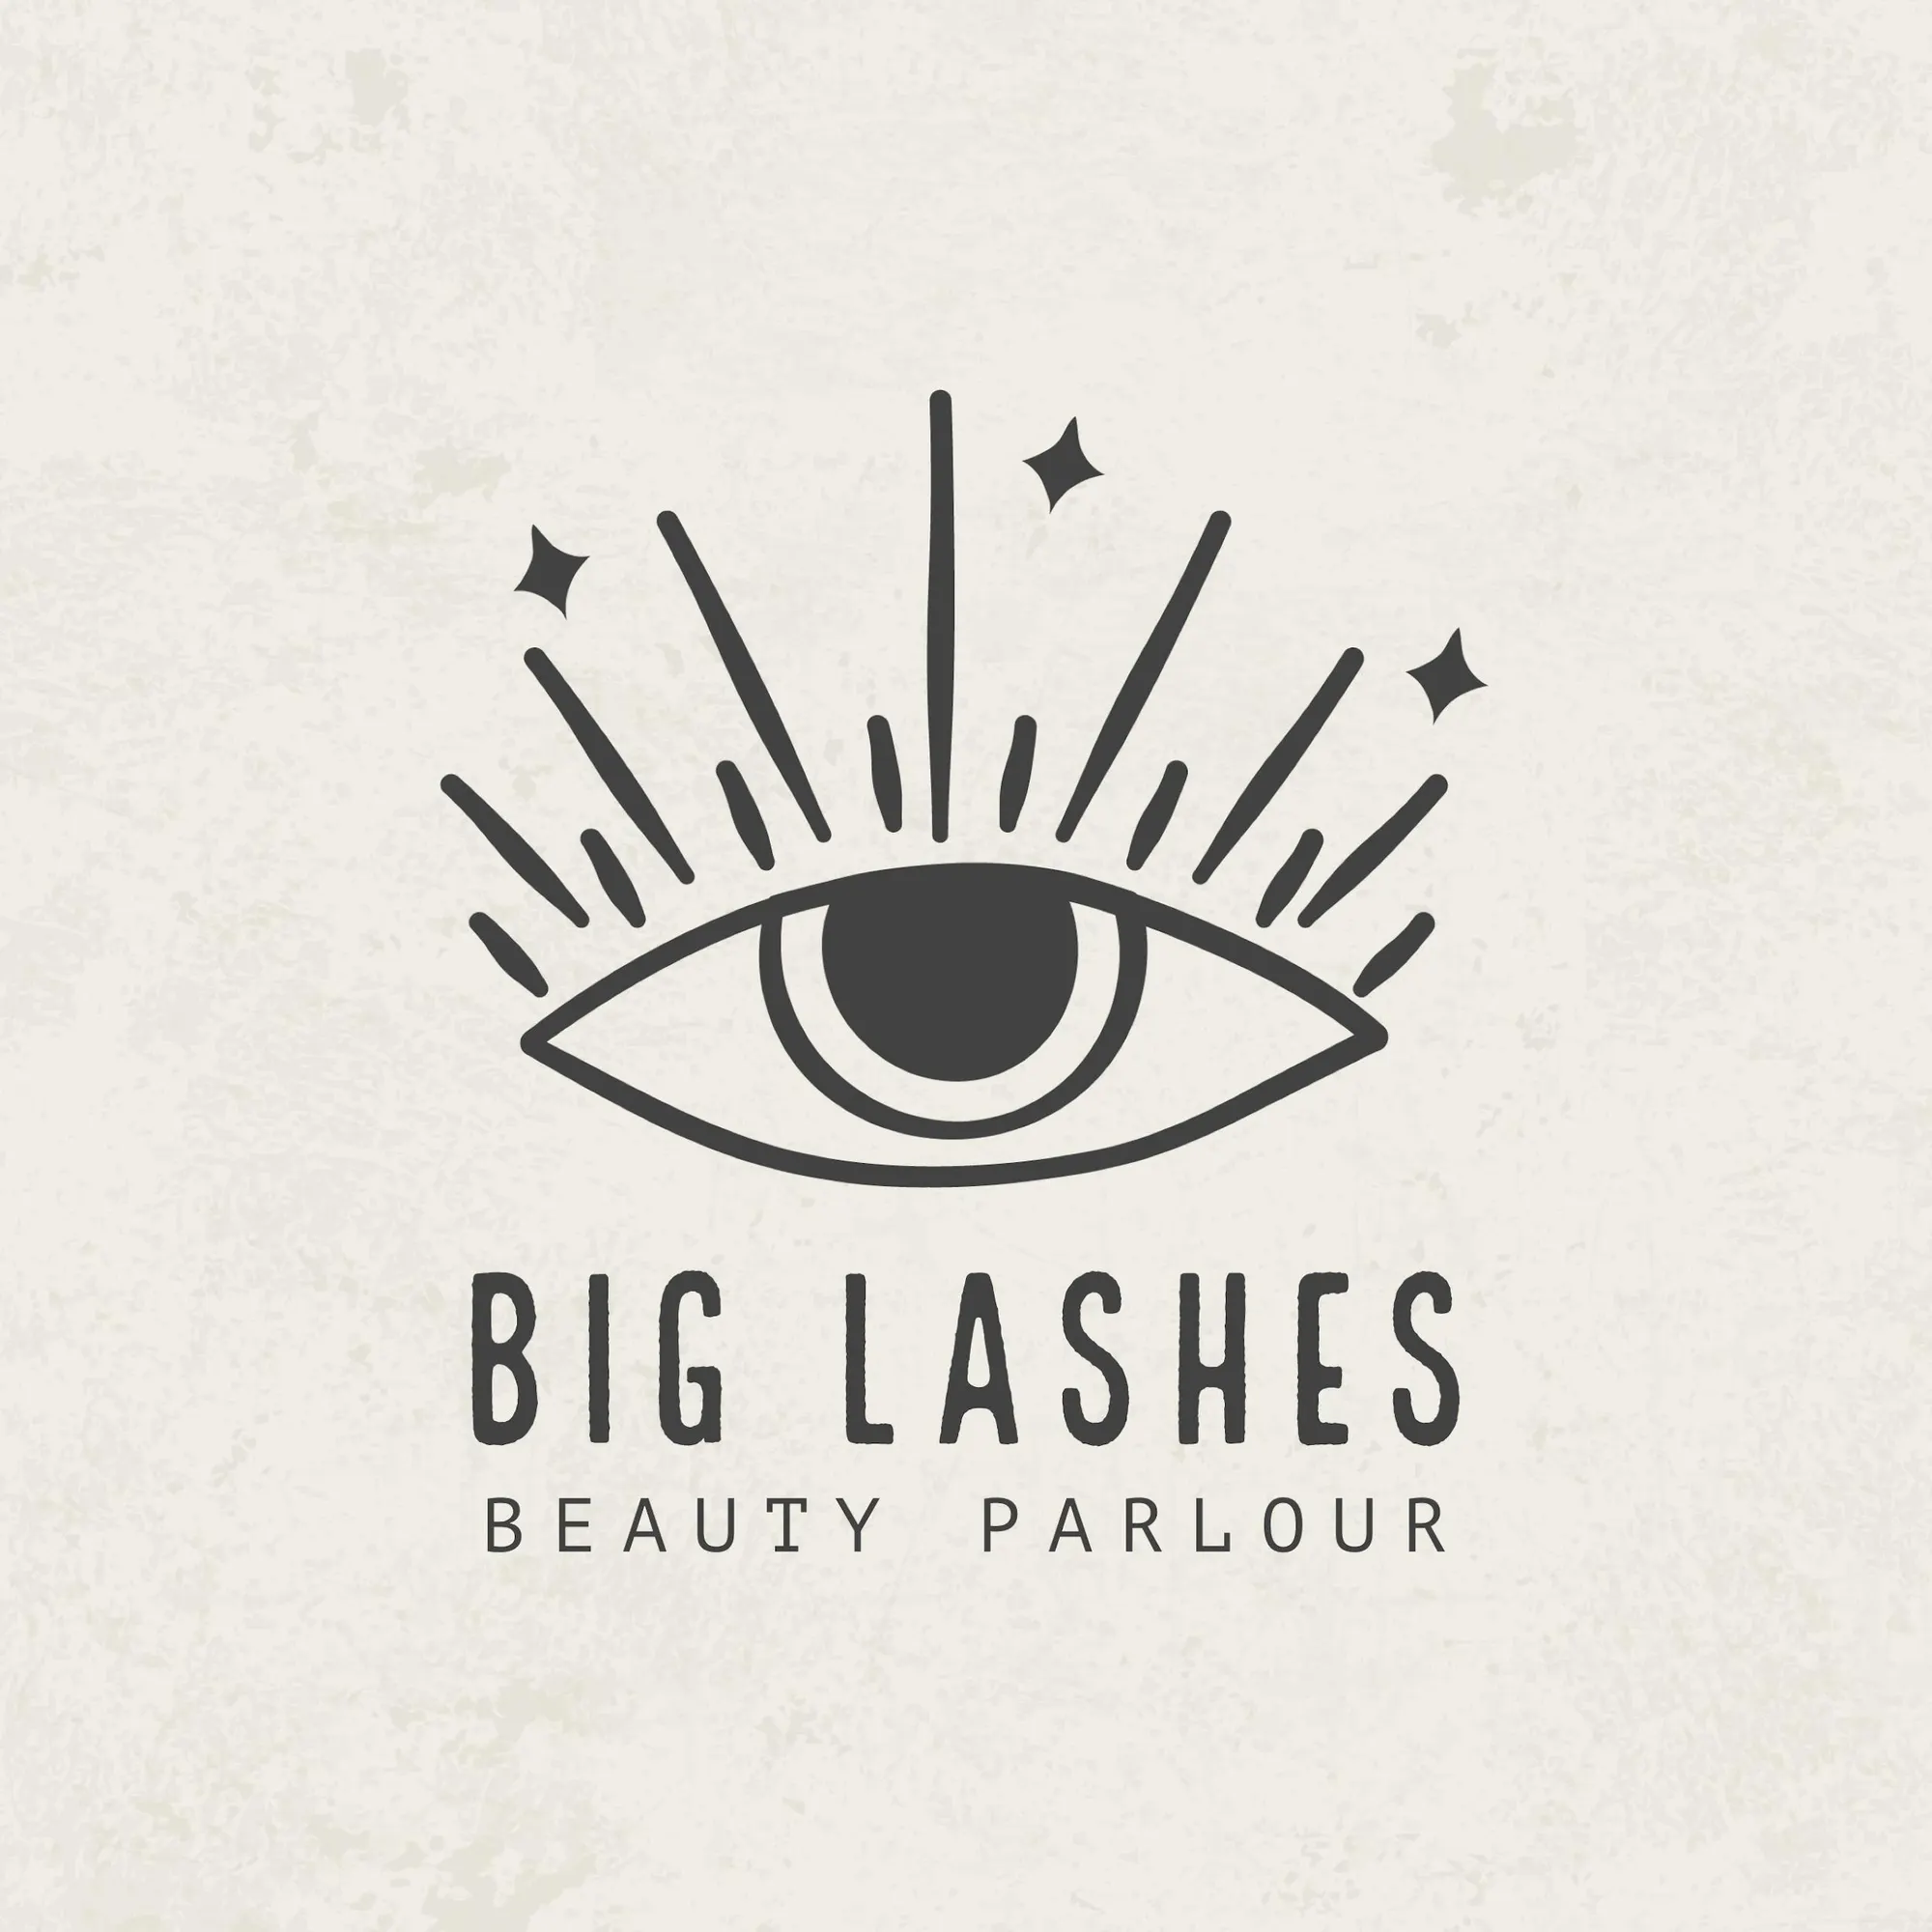 Off White and Black Big Lashes Beauty Parlour Logo